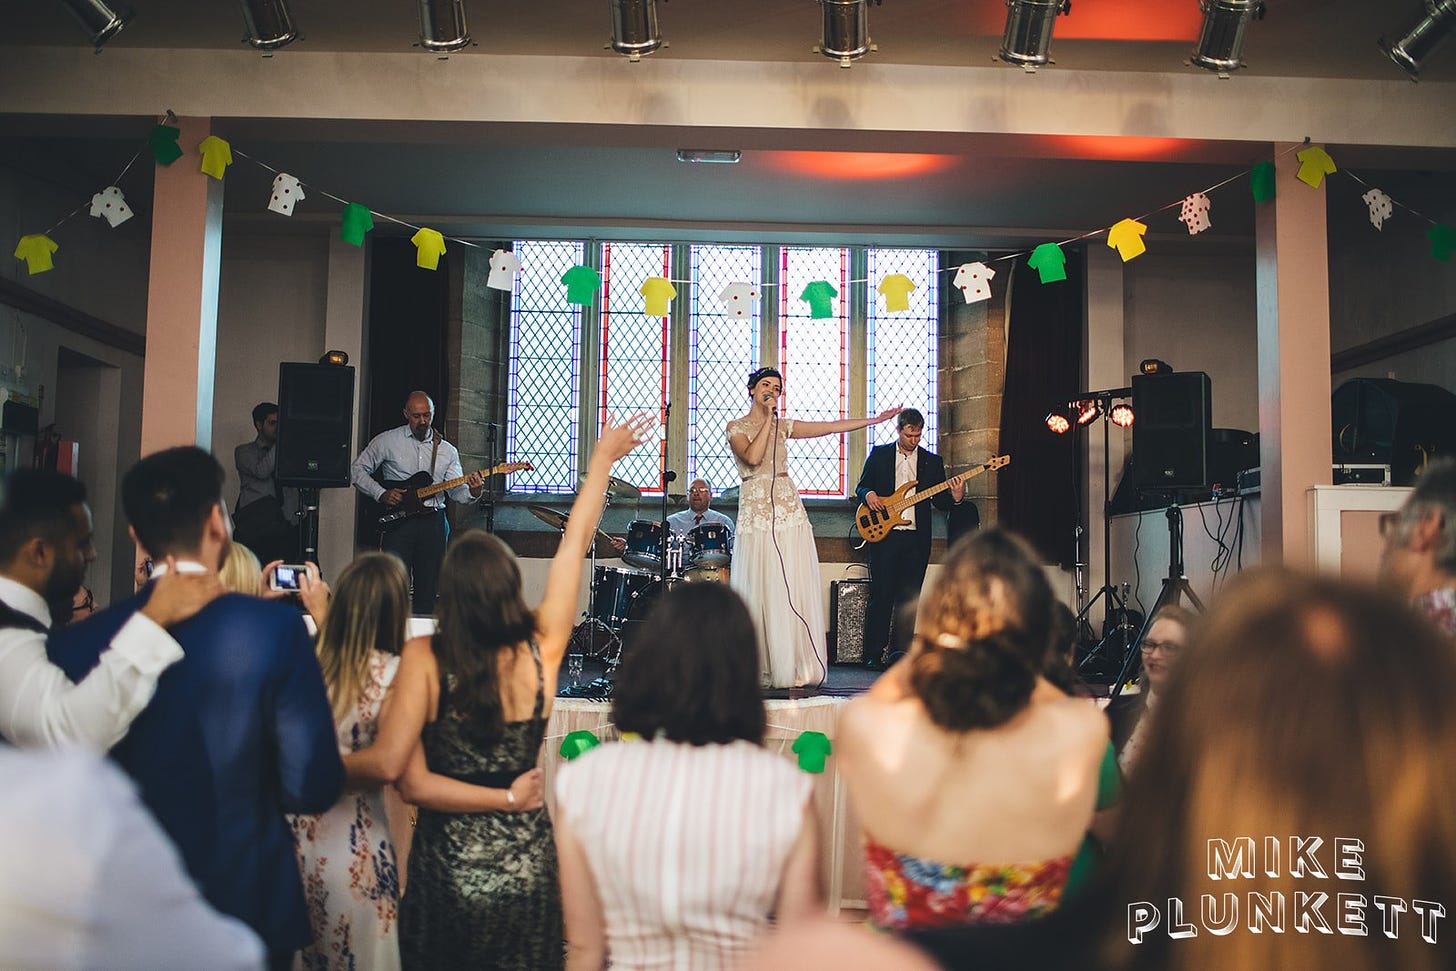 I’m a white woman with short brown hair, in the middle of the stage with my right arm out by my side wearing a beautiful tulle-skirt wedding gown. Backed my Jon on bass, Andy on guitar and Steve on drums. My loved ones are in the foreground watching from the floor.